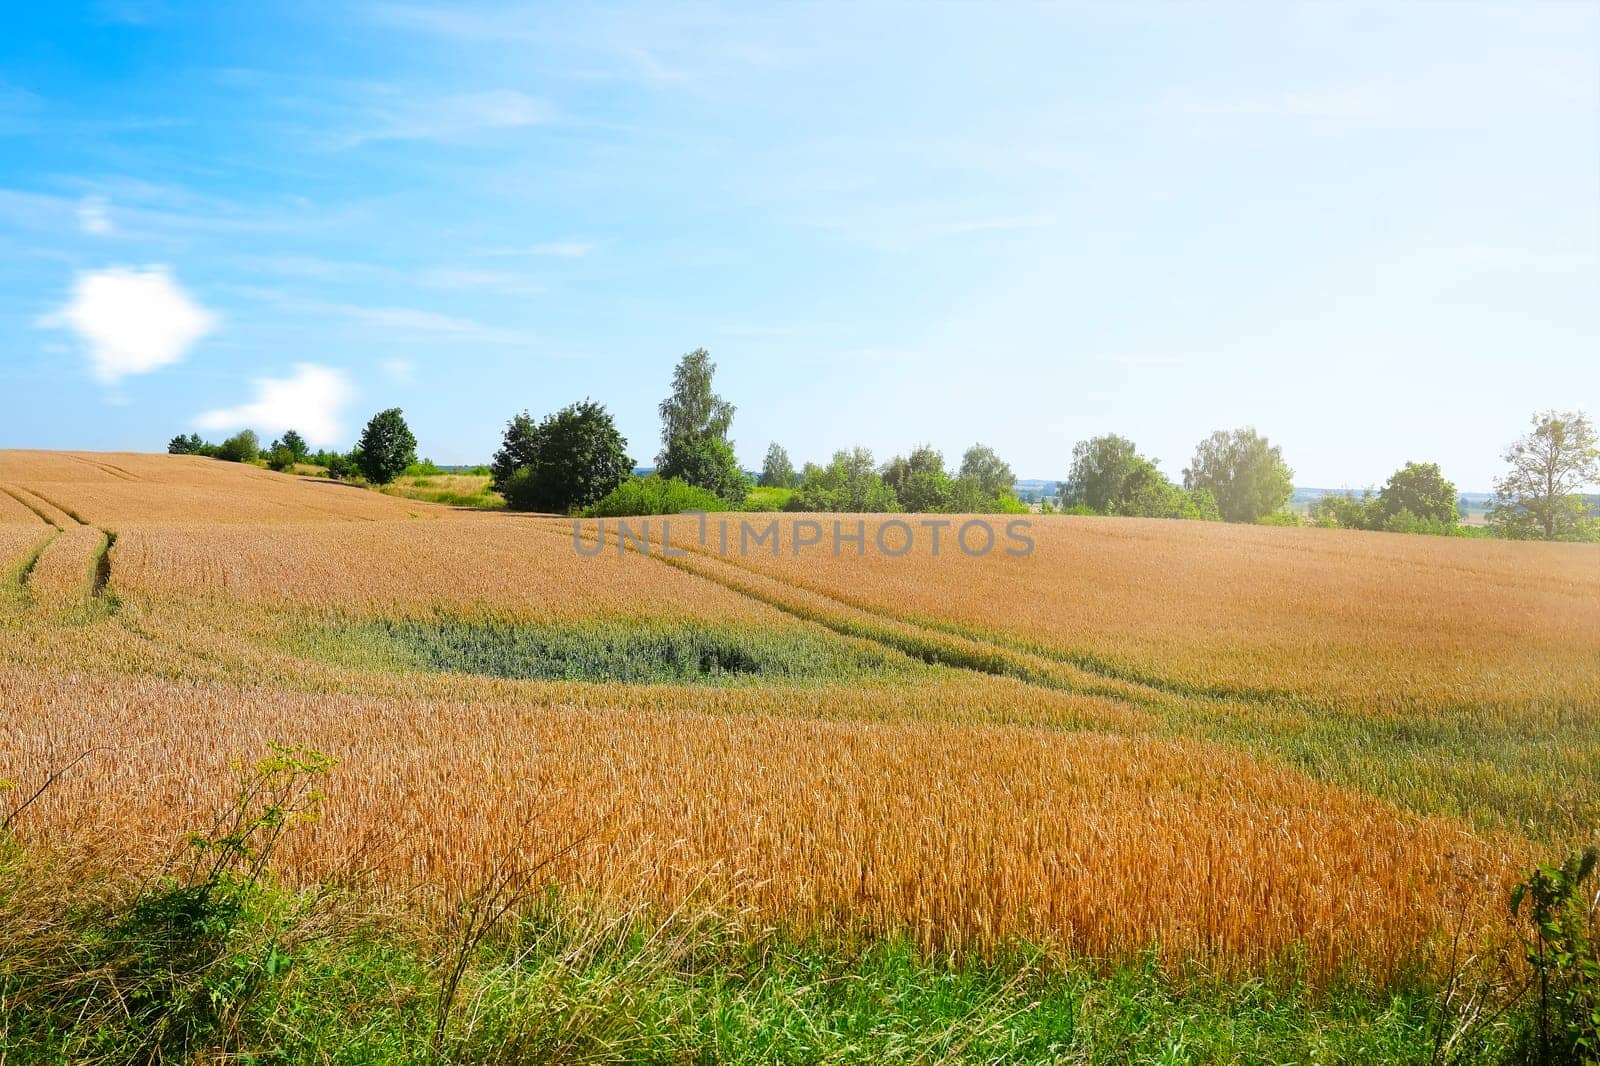 Tranquil and picturesque rural scene featuring a lush, glowing golden wheat field set against the backdrop of a deep blue sky on a warm, sunny summer day in Poland.